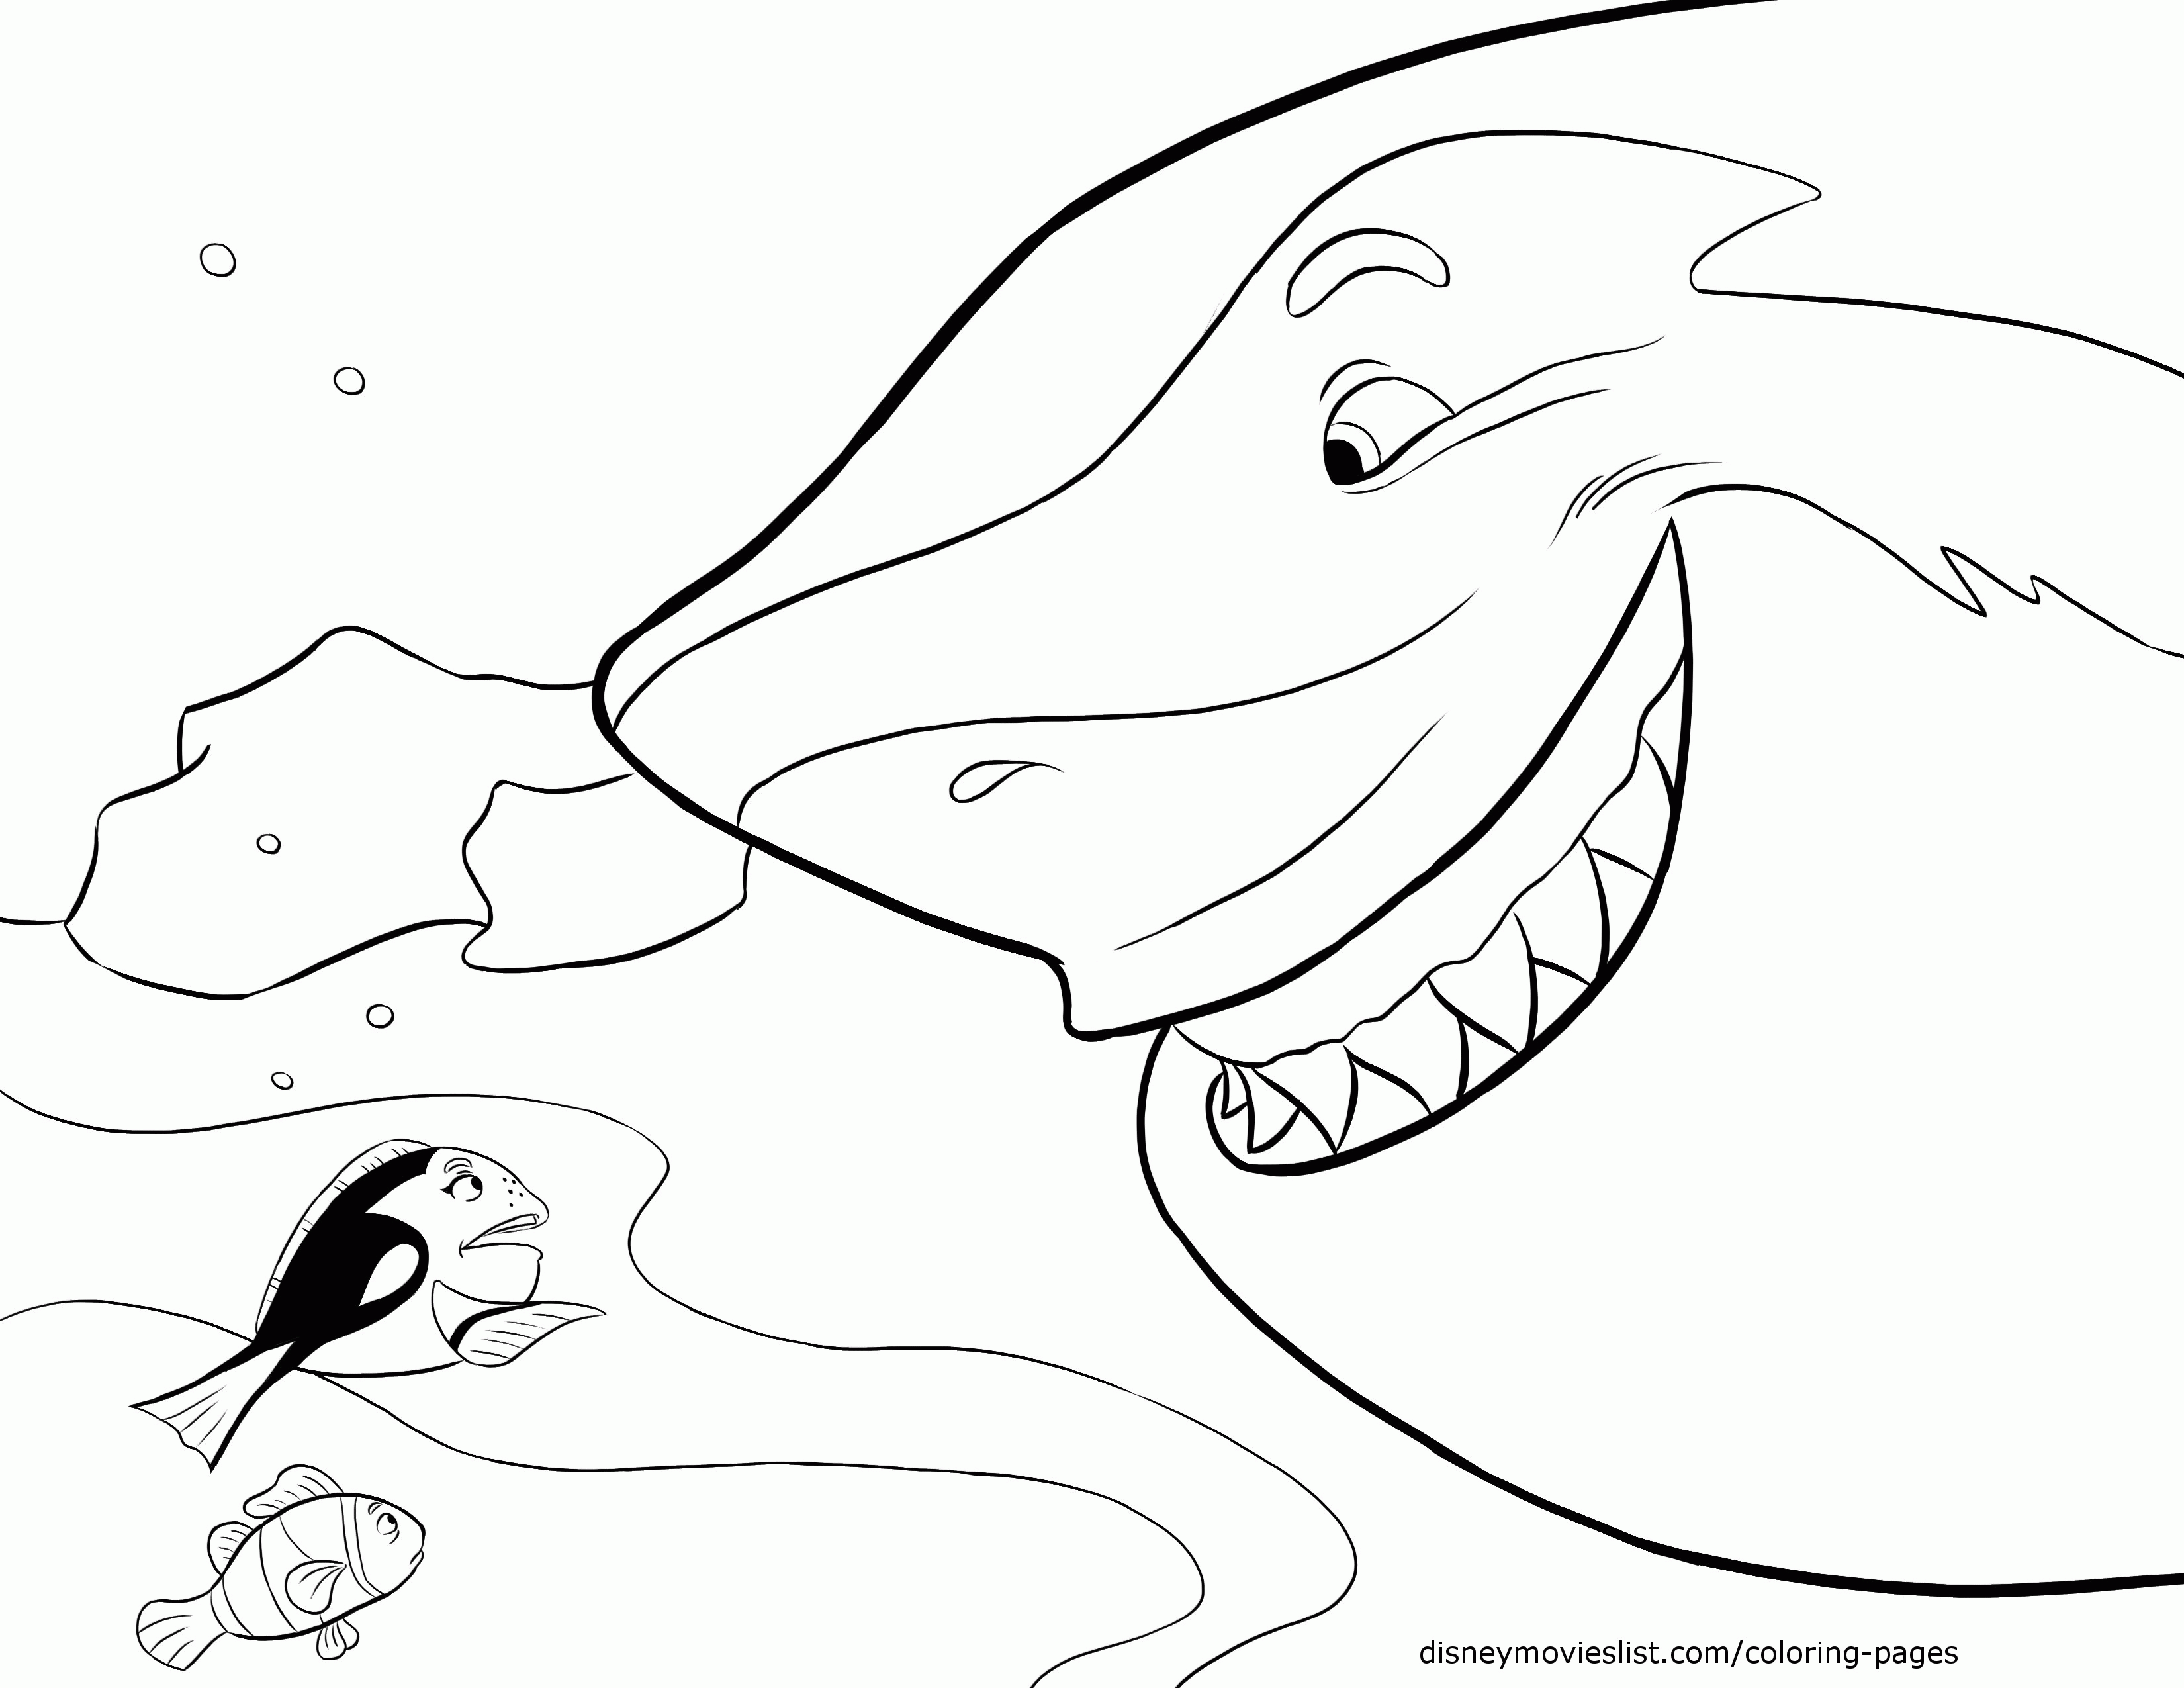 Disney's Finding Nemo Bruce the Shark Coloring Page